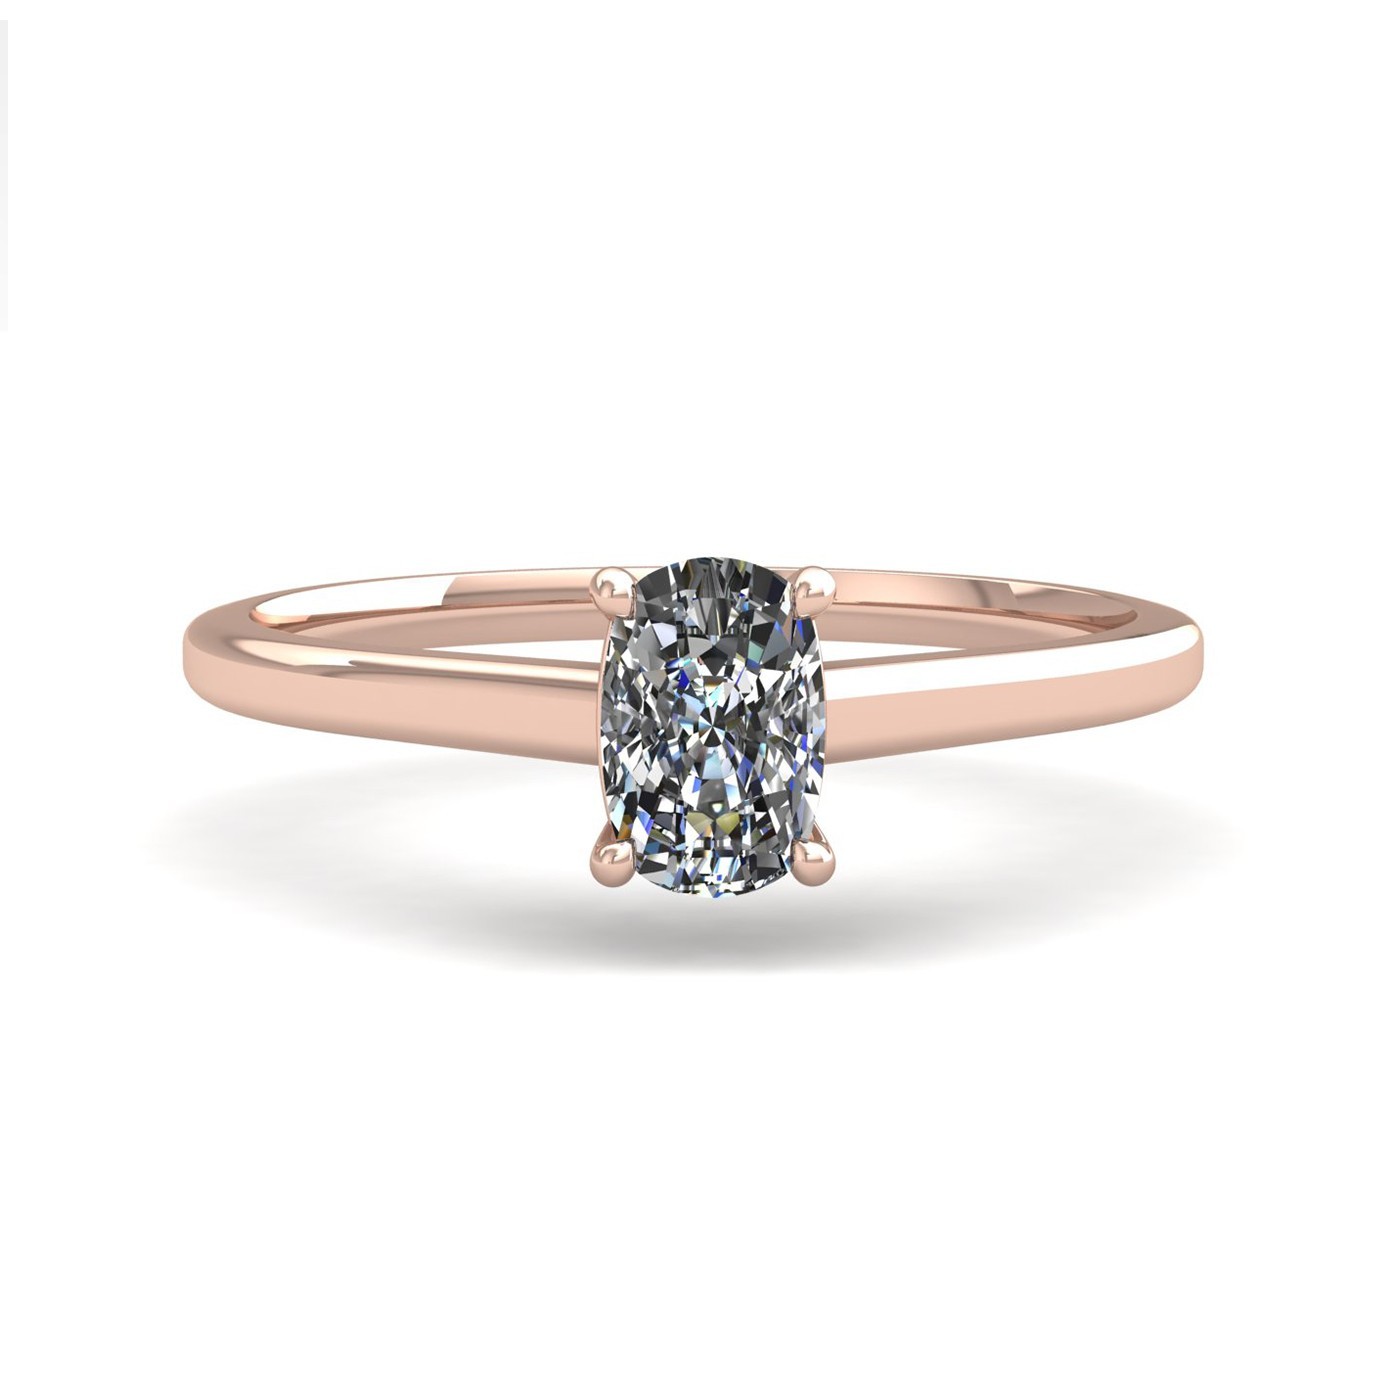 18k rose gold  2.50 ct 4 prongs solitaire elongated cushion cut diamond engagement ring with whisper thin band Photos & images